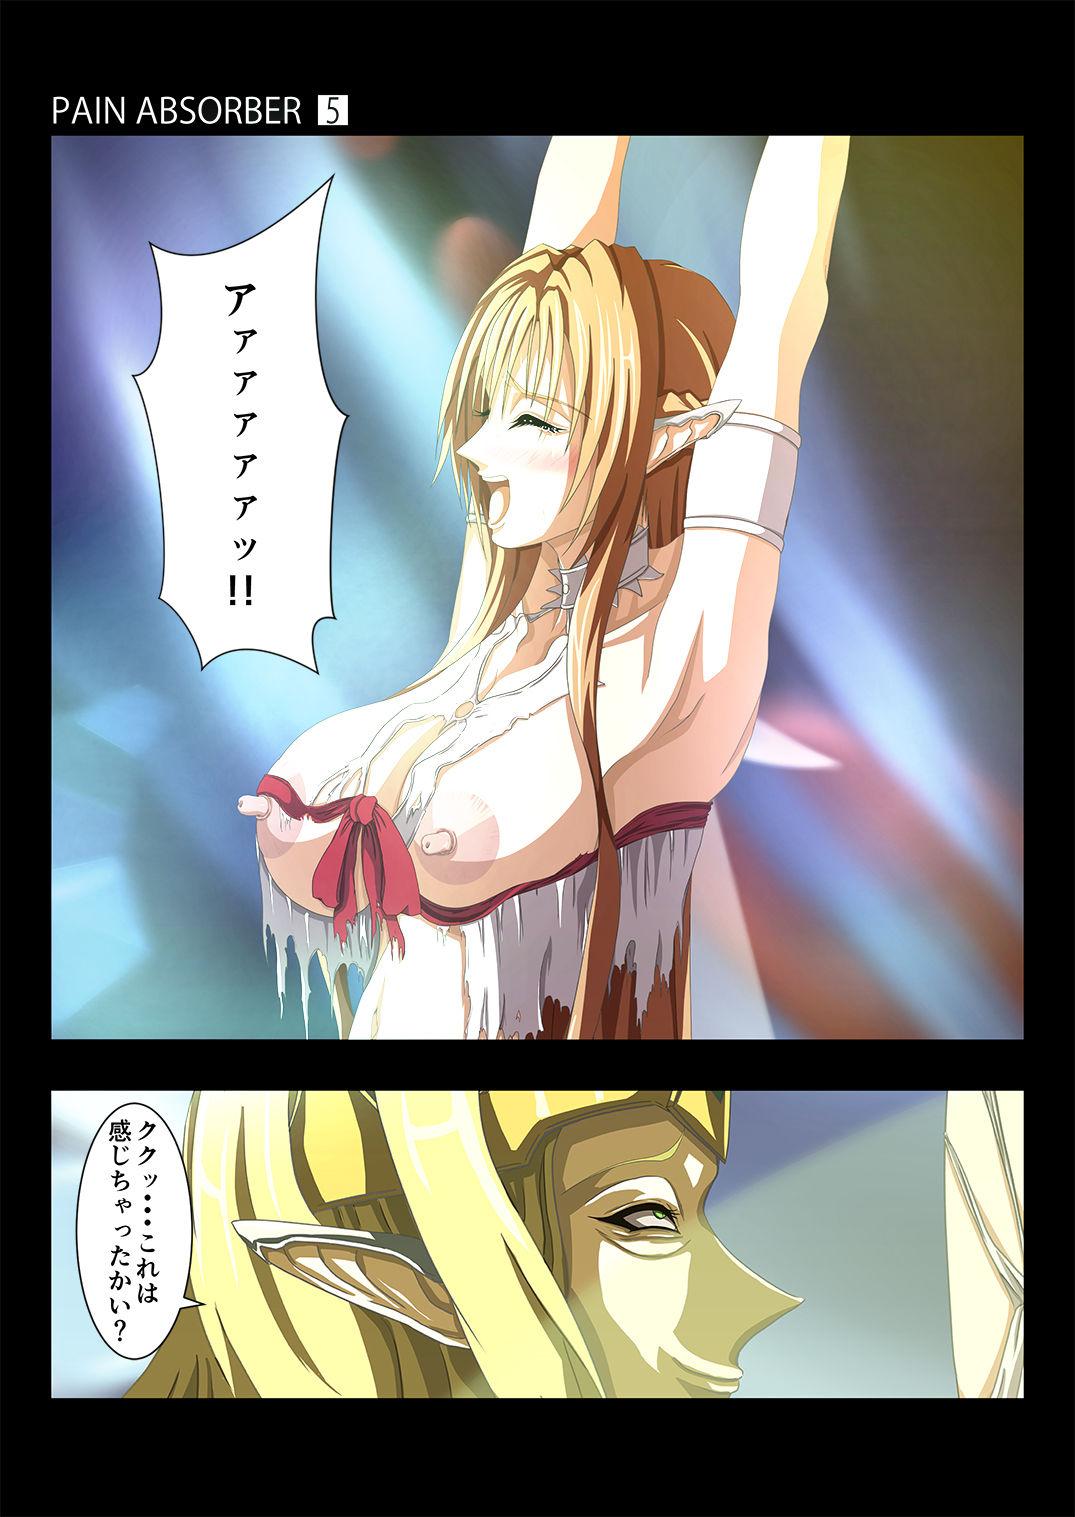 Step Sister PAIN ABSORBER 5 - Sword art online Brother Sister - Page 6